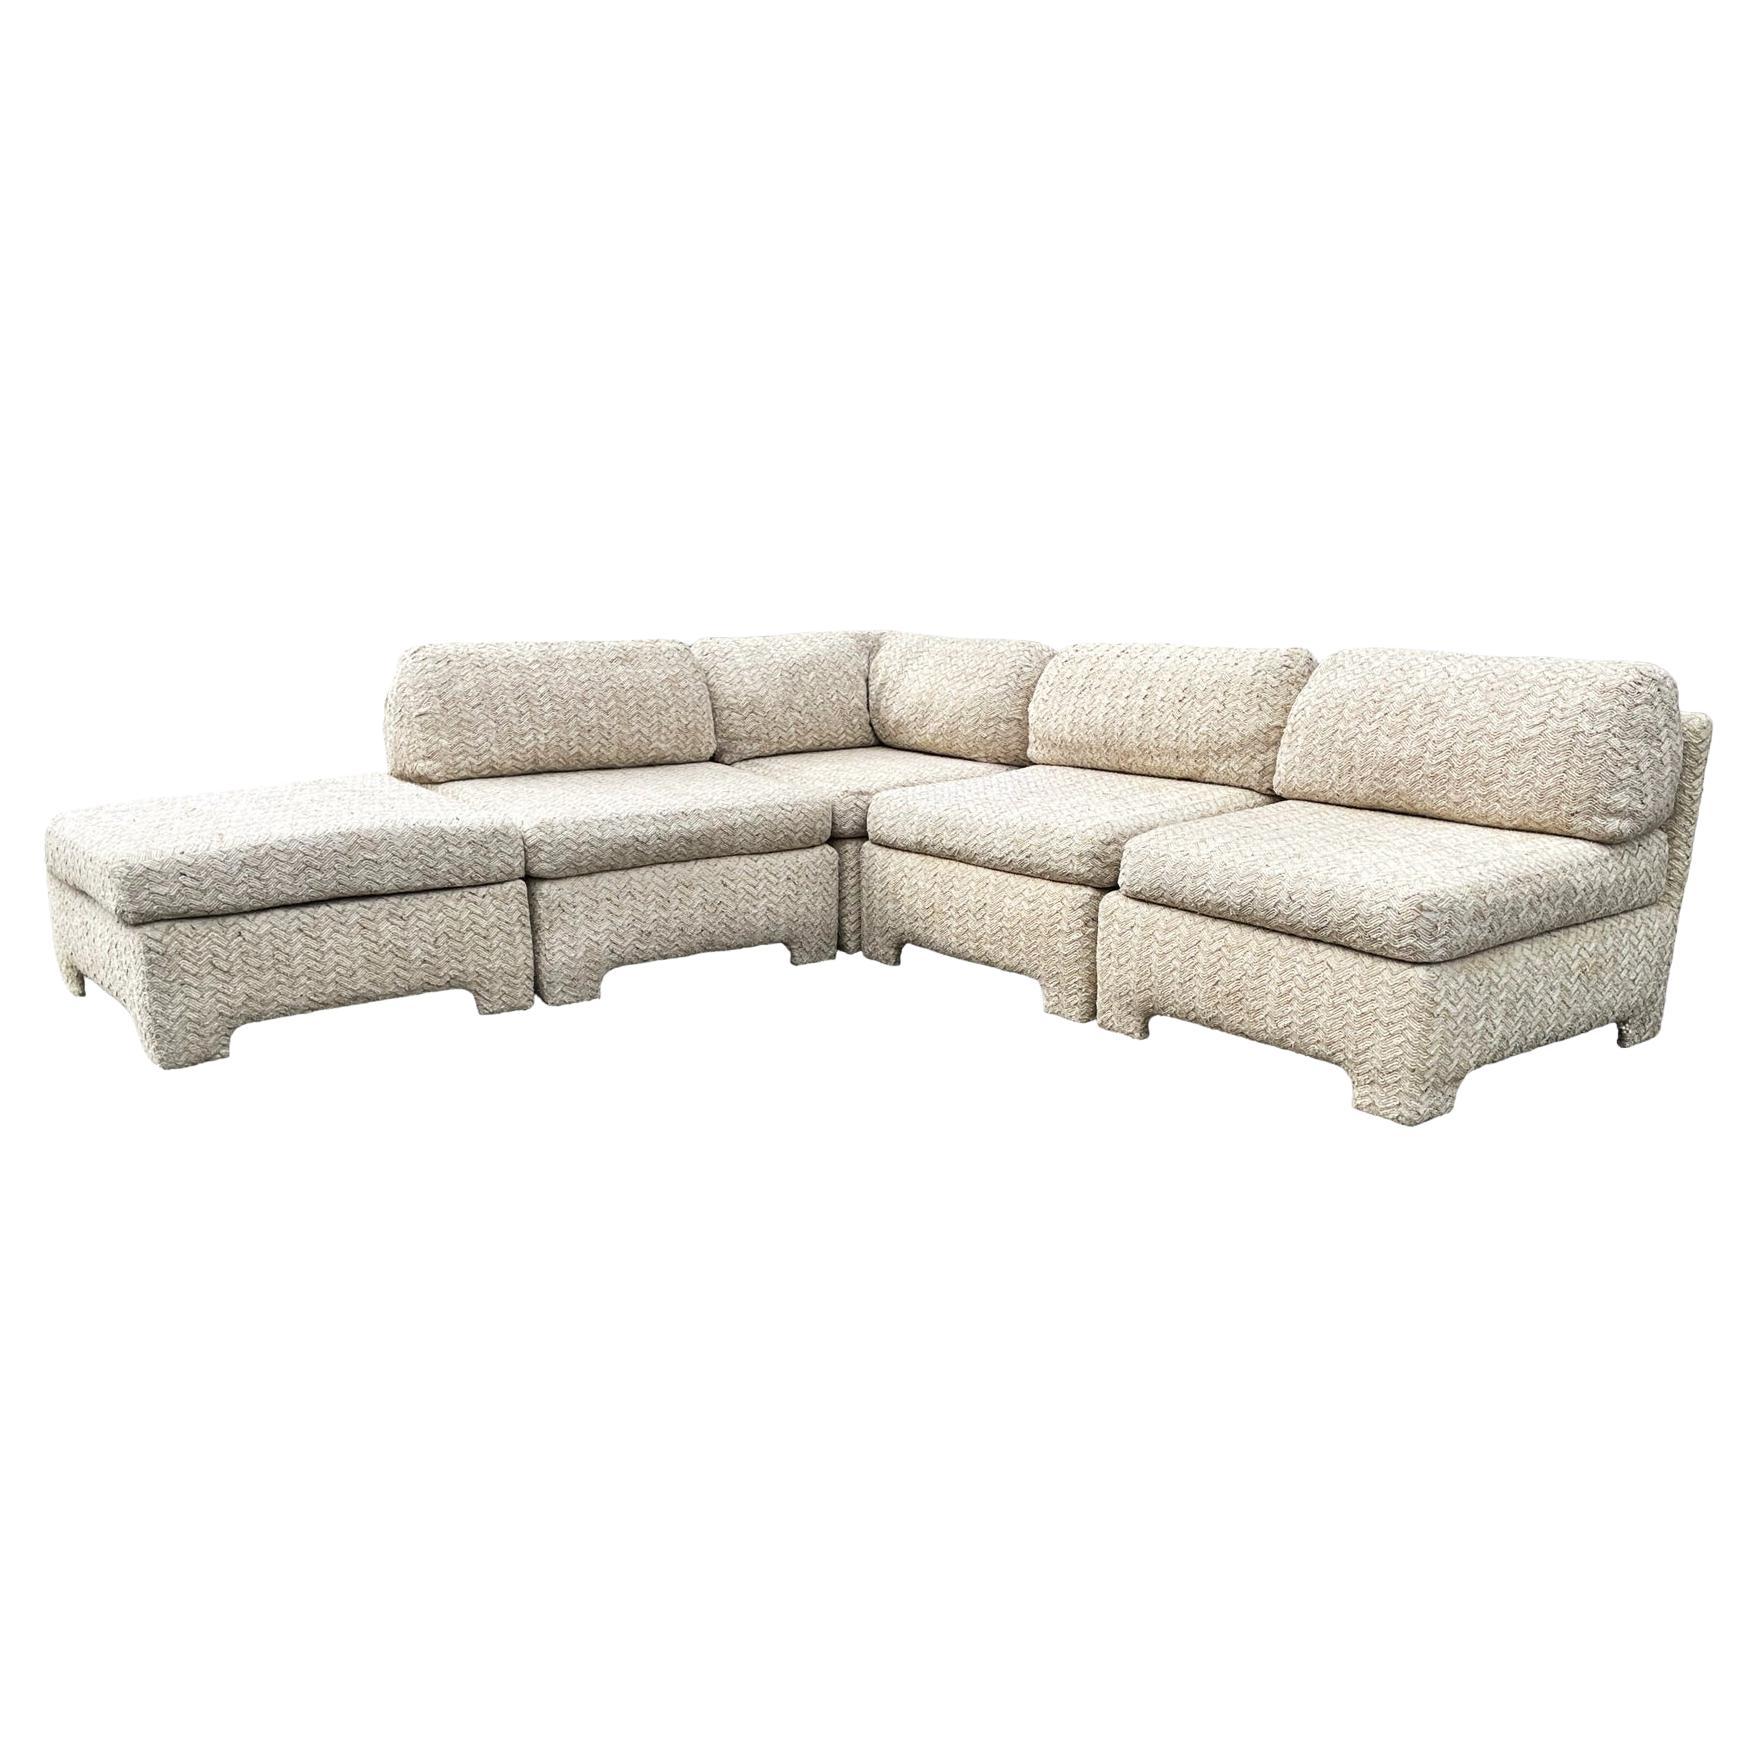 What is a chaise on a couch?